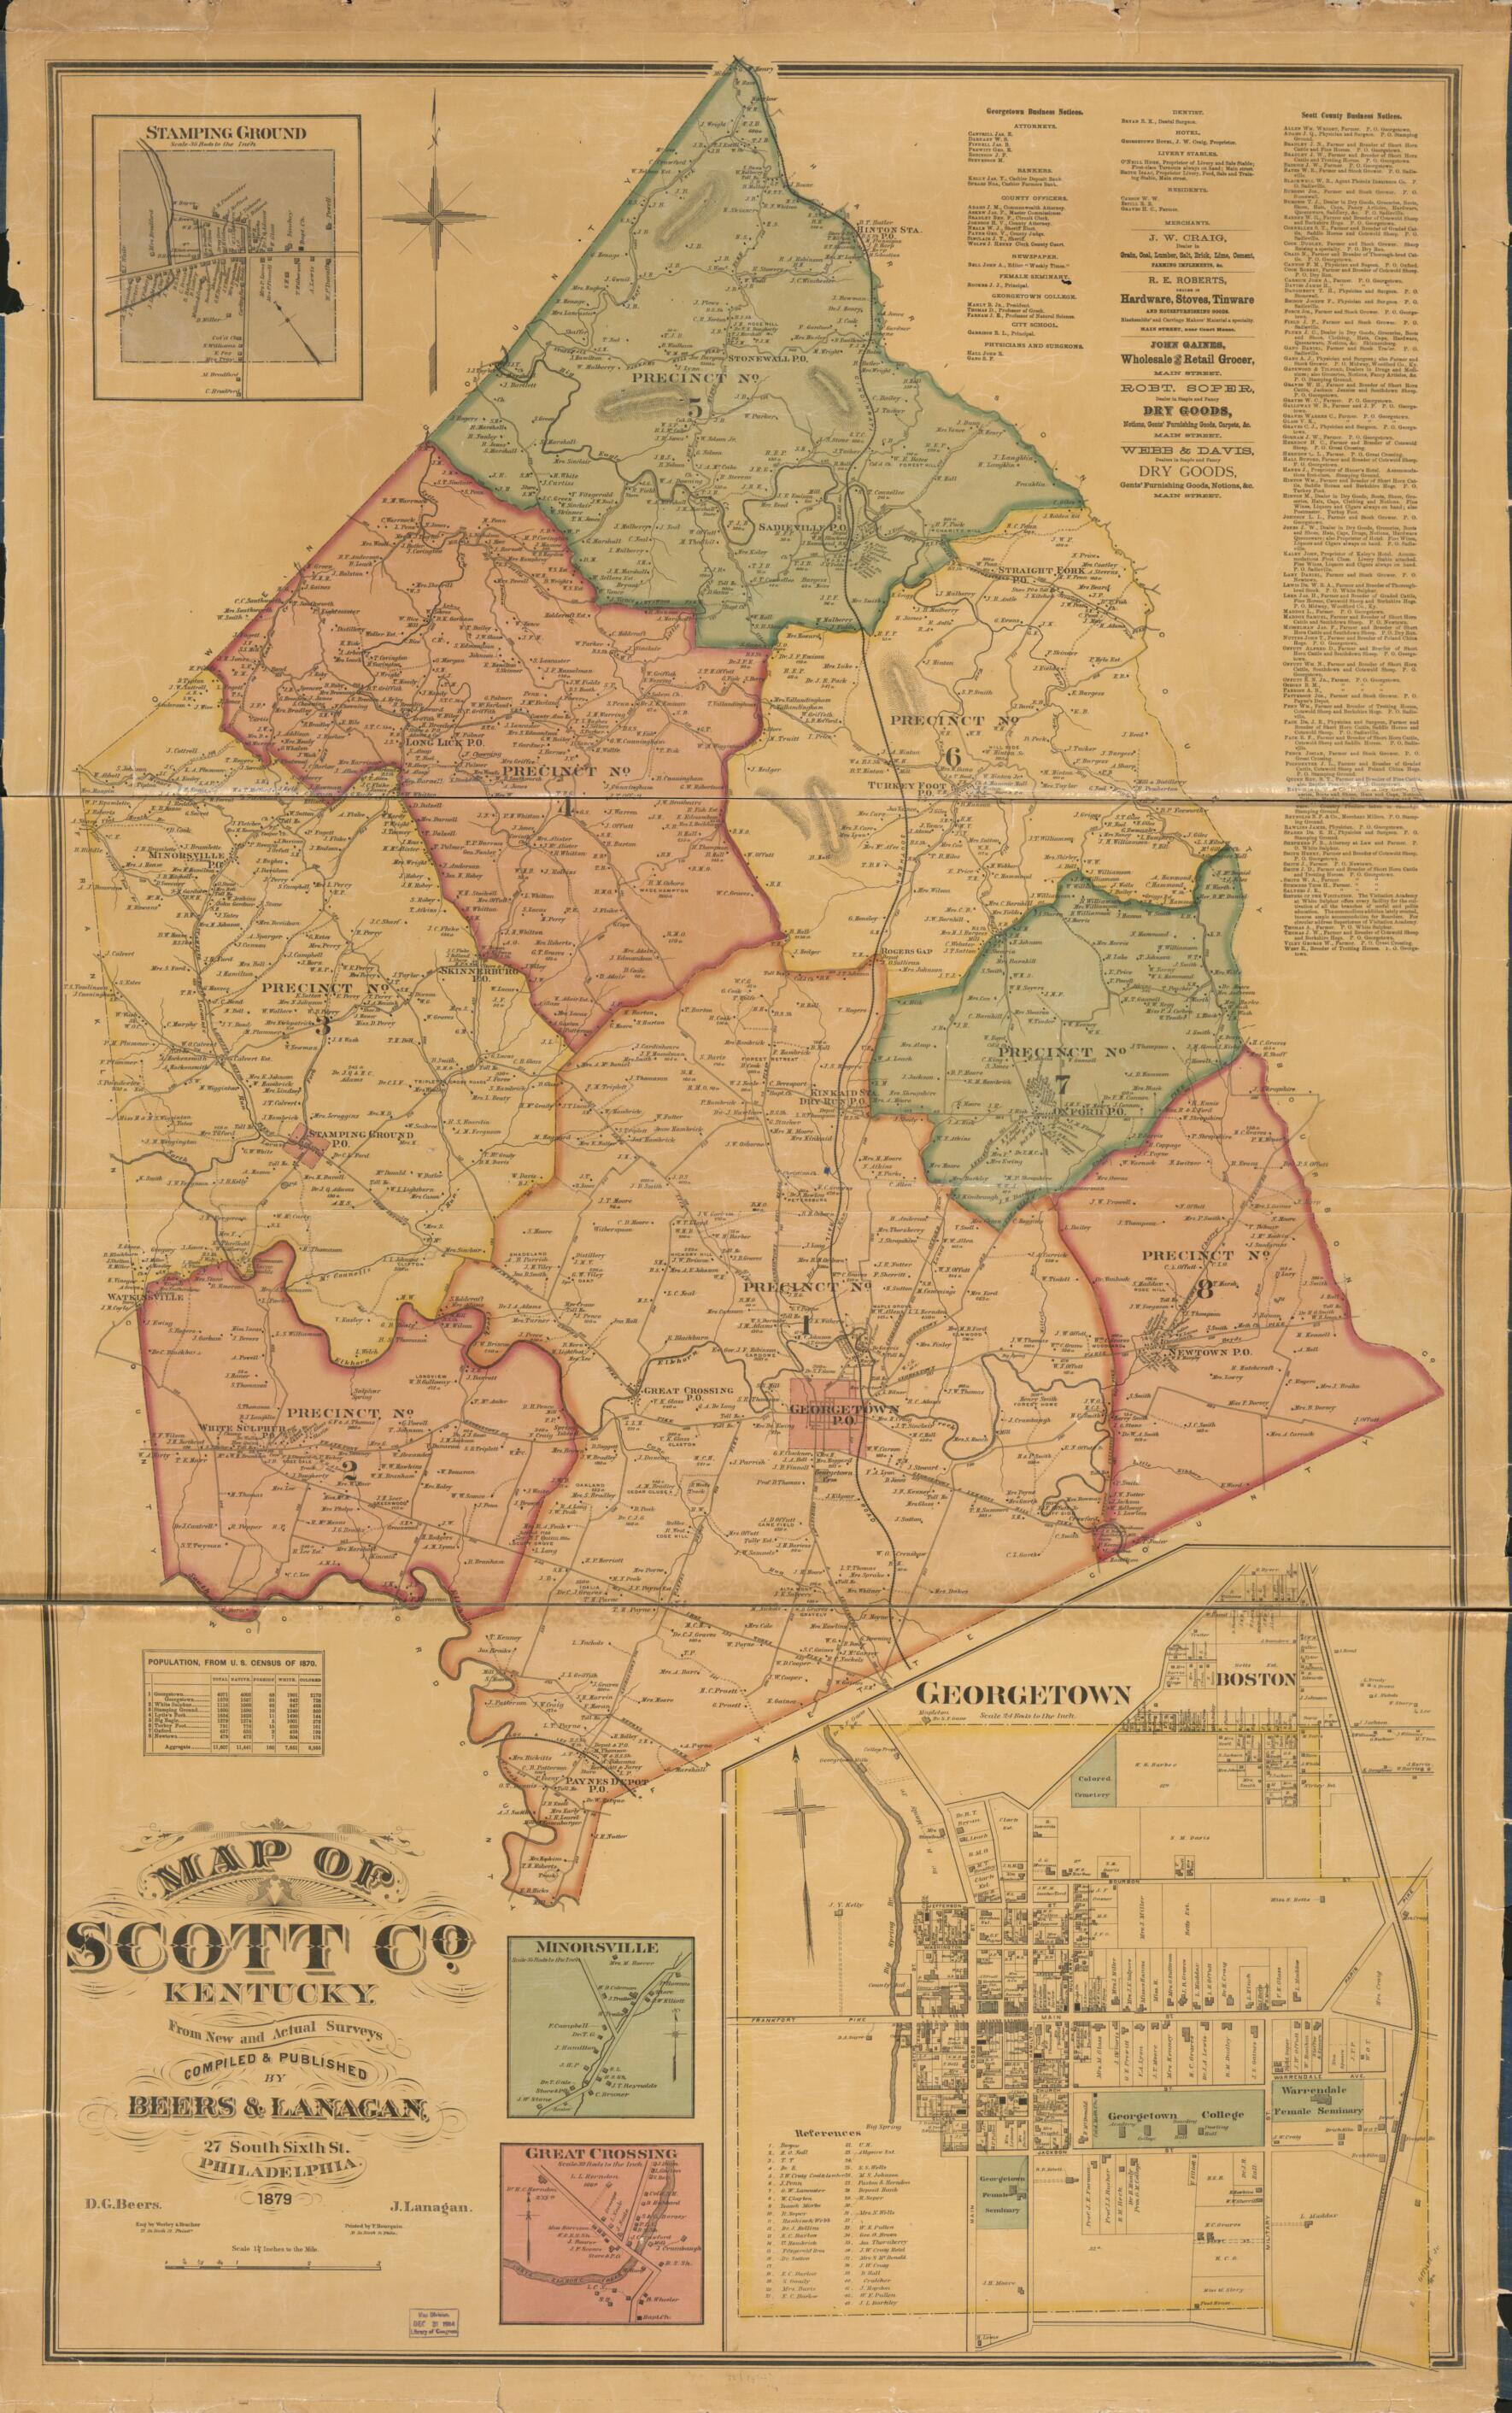 This old map of Map of Scott Co., Kentucky (Map of Scott County, Kentucky) from 1879 was created by D. G. (Daniel G.) Beers, F. (Frederick) Bourquin, J. Lanagan,  Worley &amp; Bracher in 1879